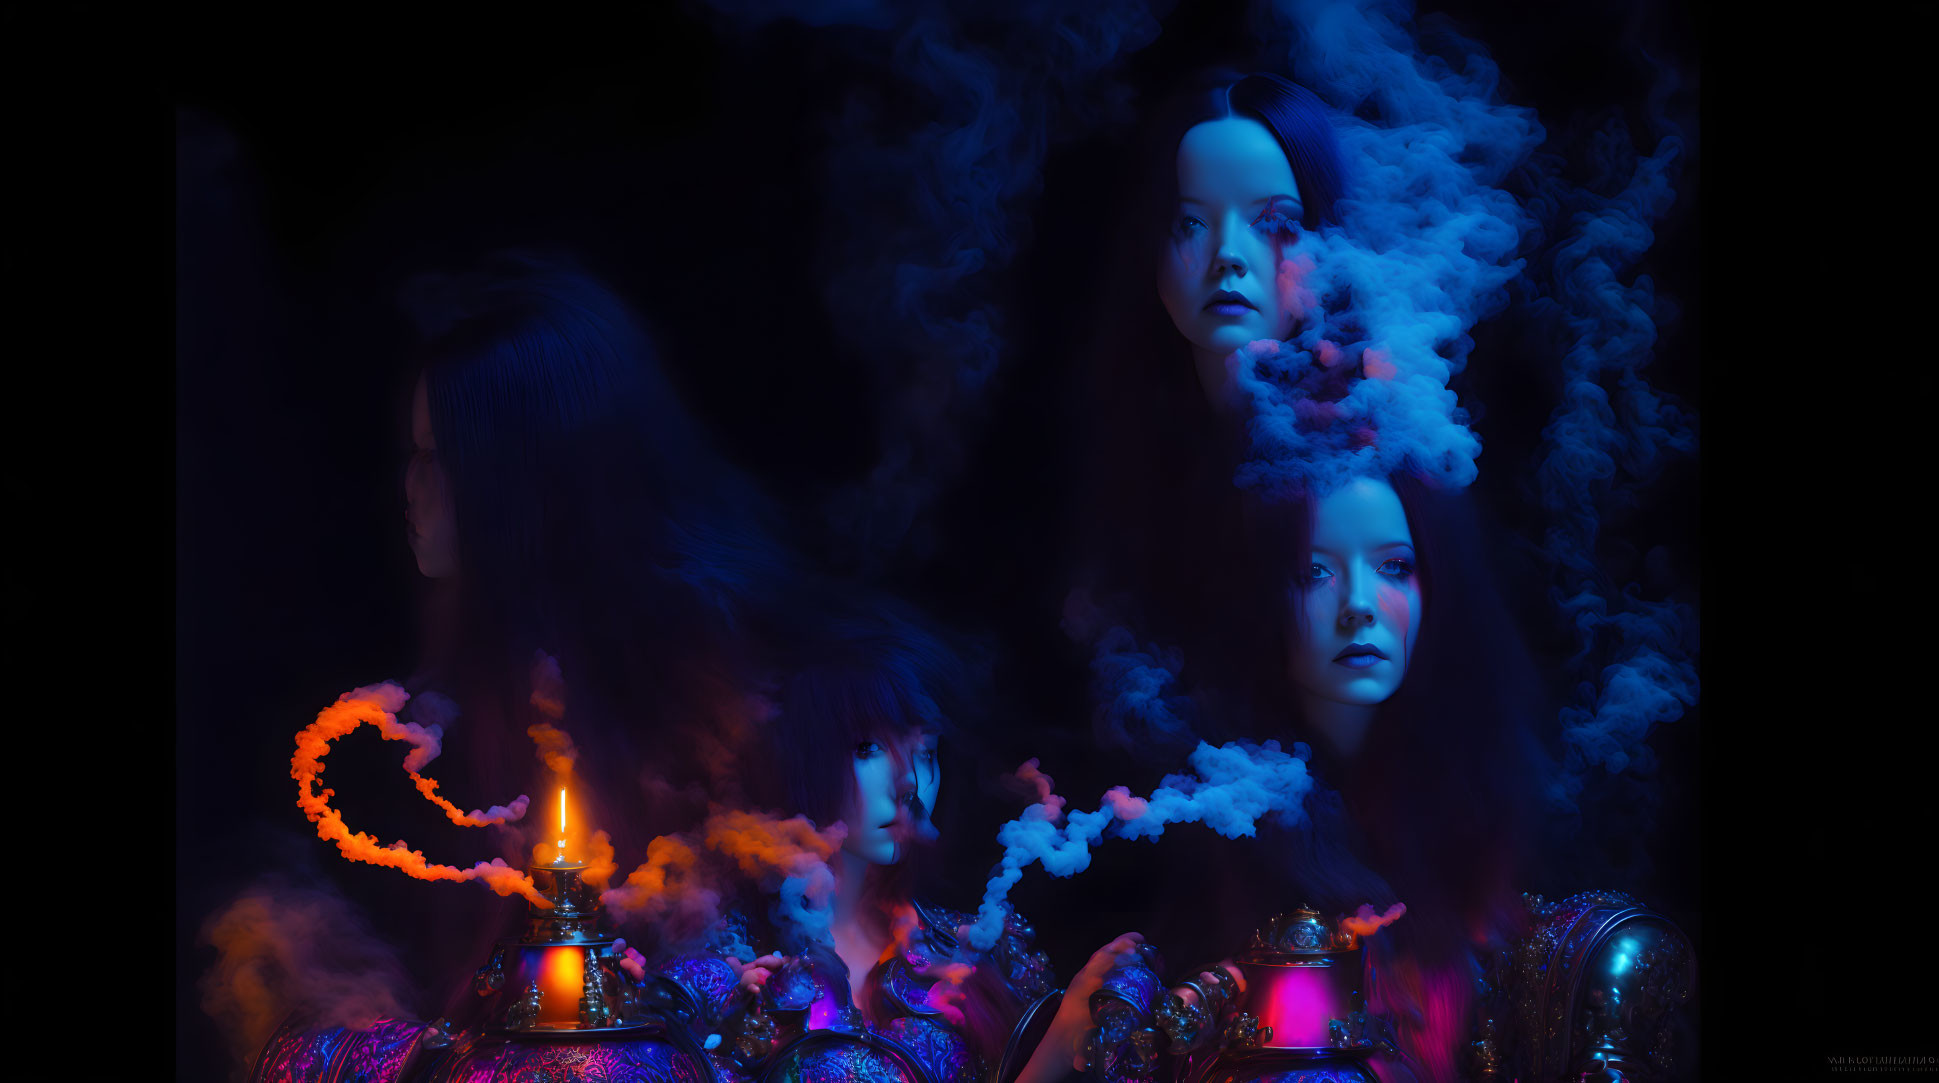 Three Women in Colorful Lighting and Smoke with Candles and Reflective Surfaces